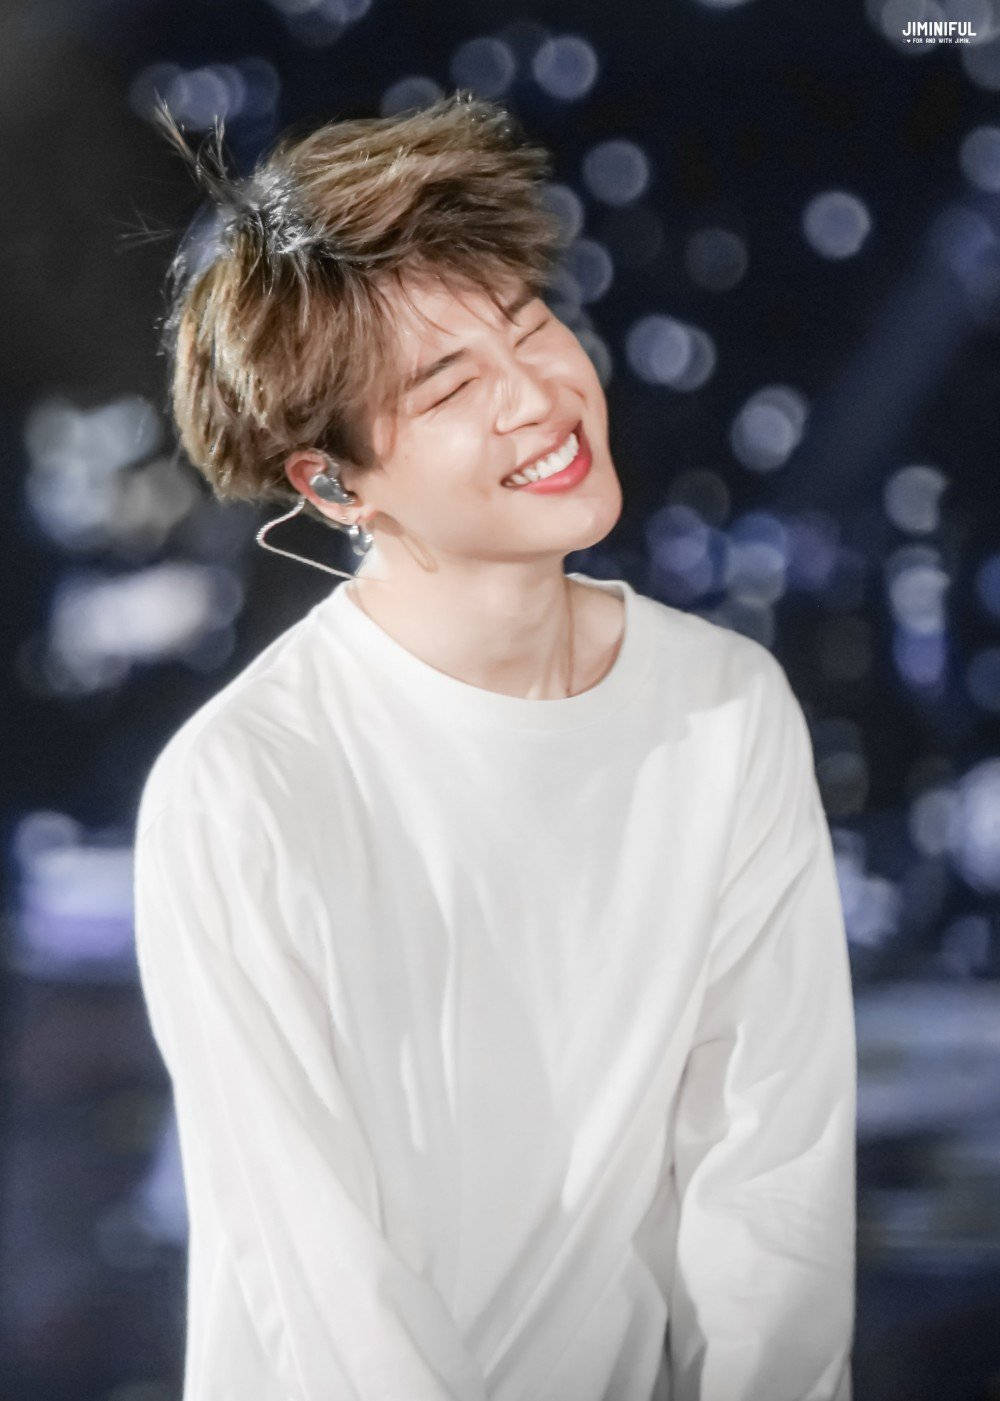 Jimin Of Bts Smiles At His Fans Onstage Wallpaper